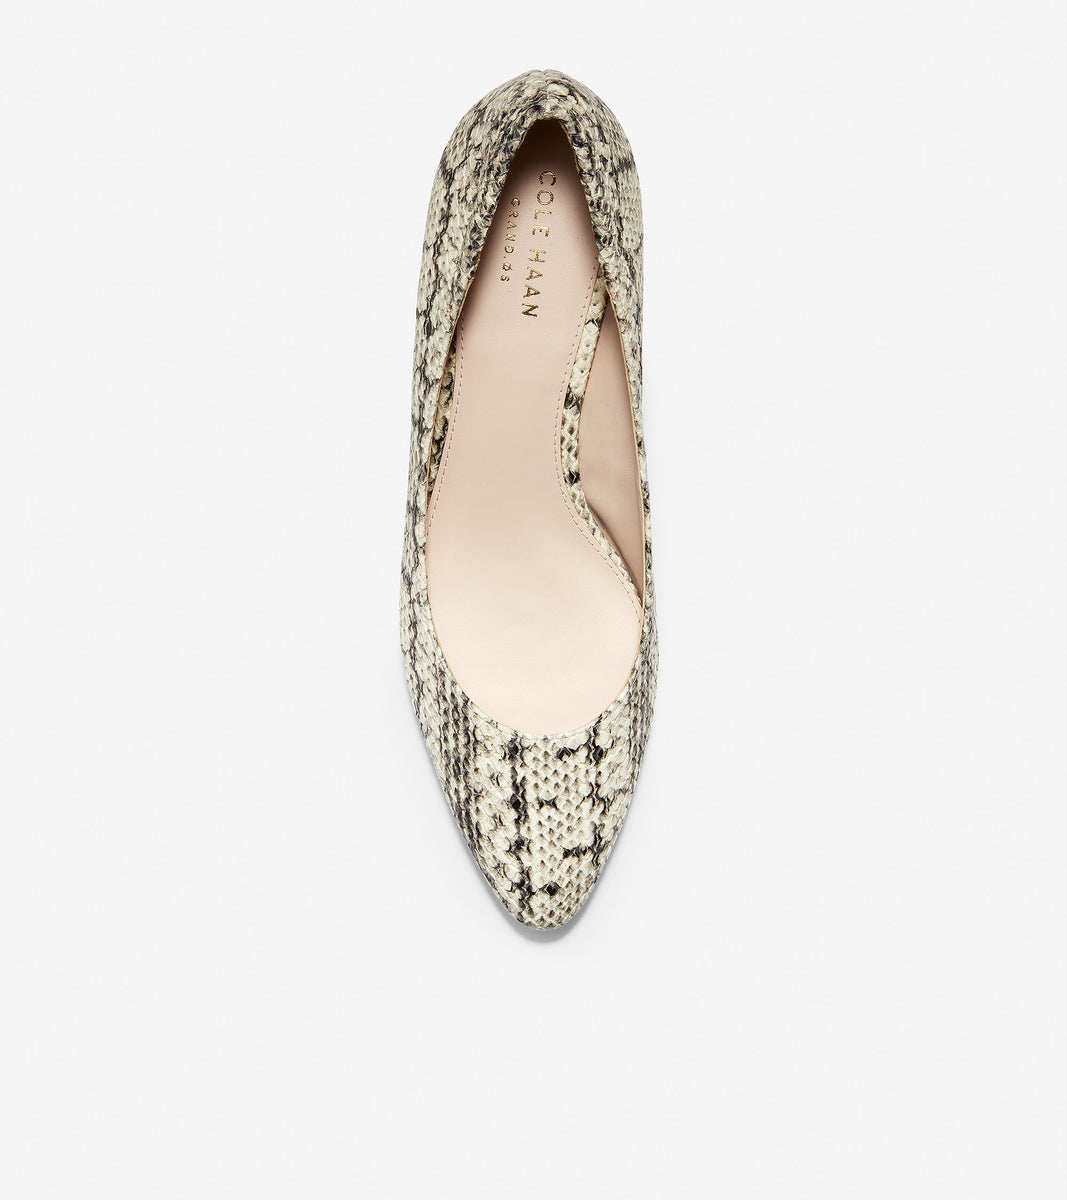 ColeHaan-Kathryn Wedge-w15839-Natural Python Print Leather